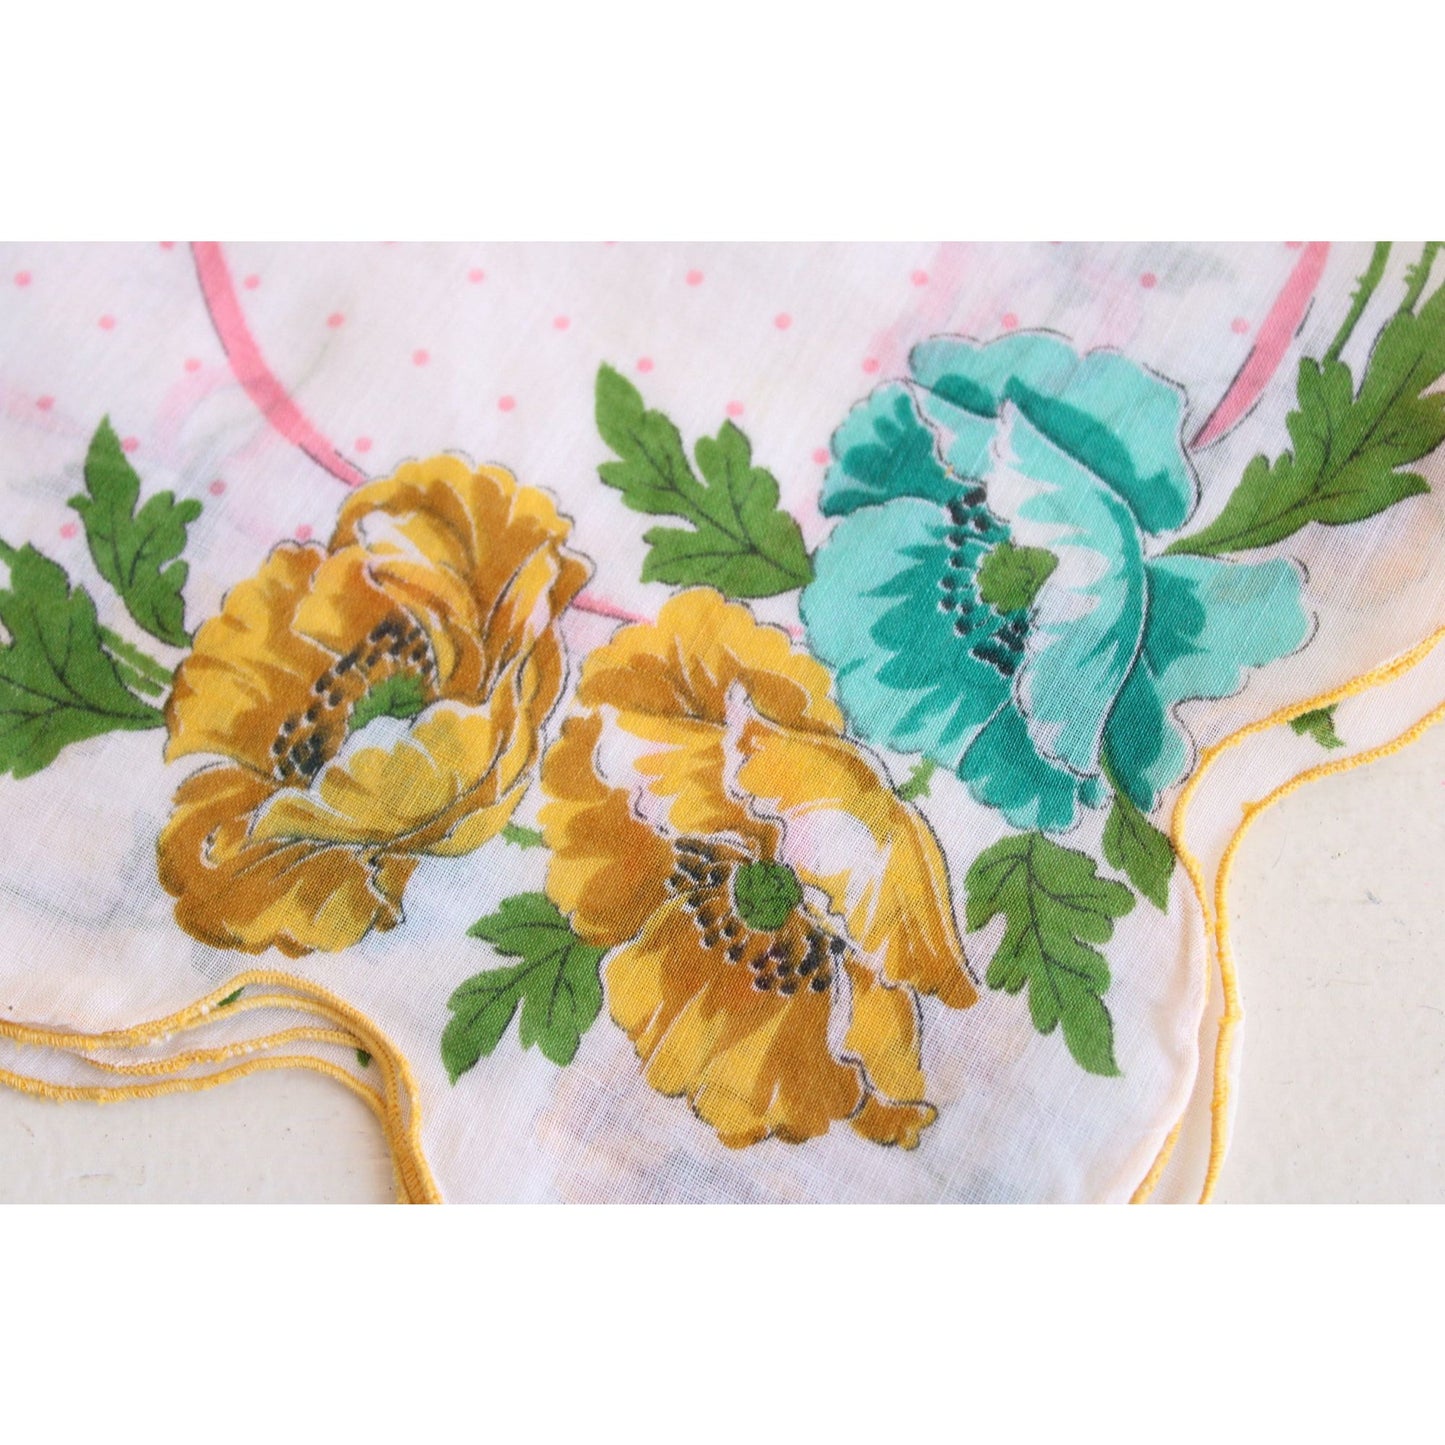 Vintage 1950s Cotton Teal and Yellow Flowers Hanky